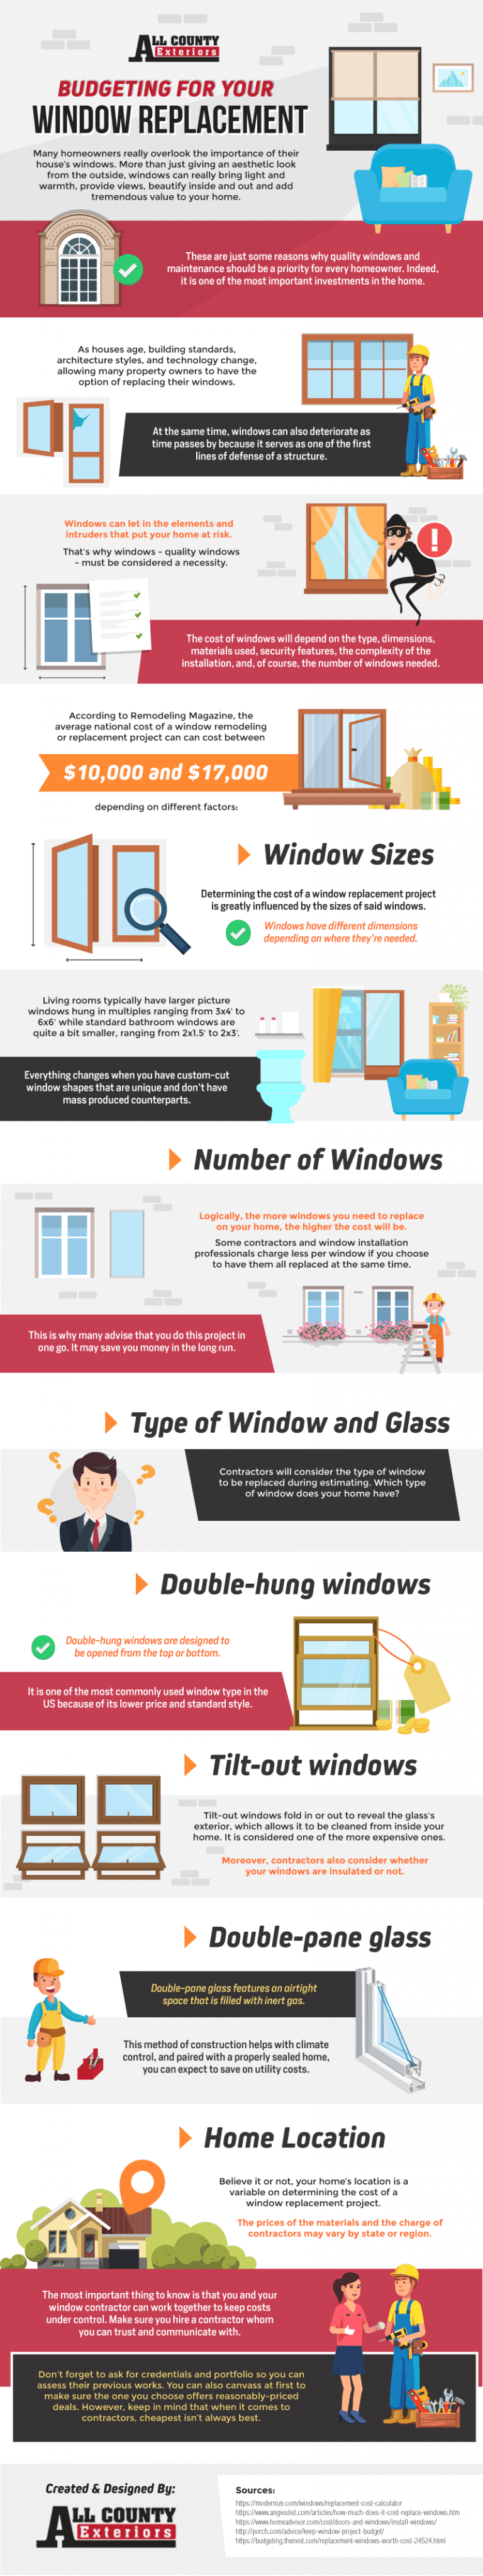 Budgeting-for-your-Window-Replacement